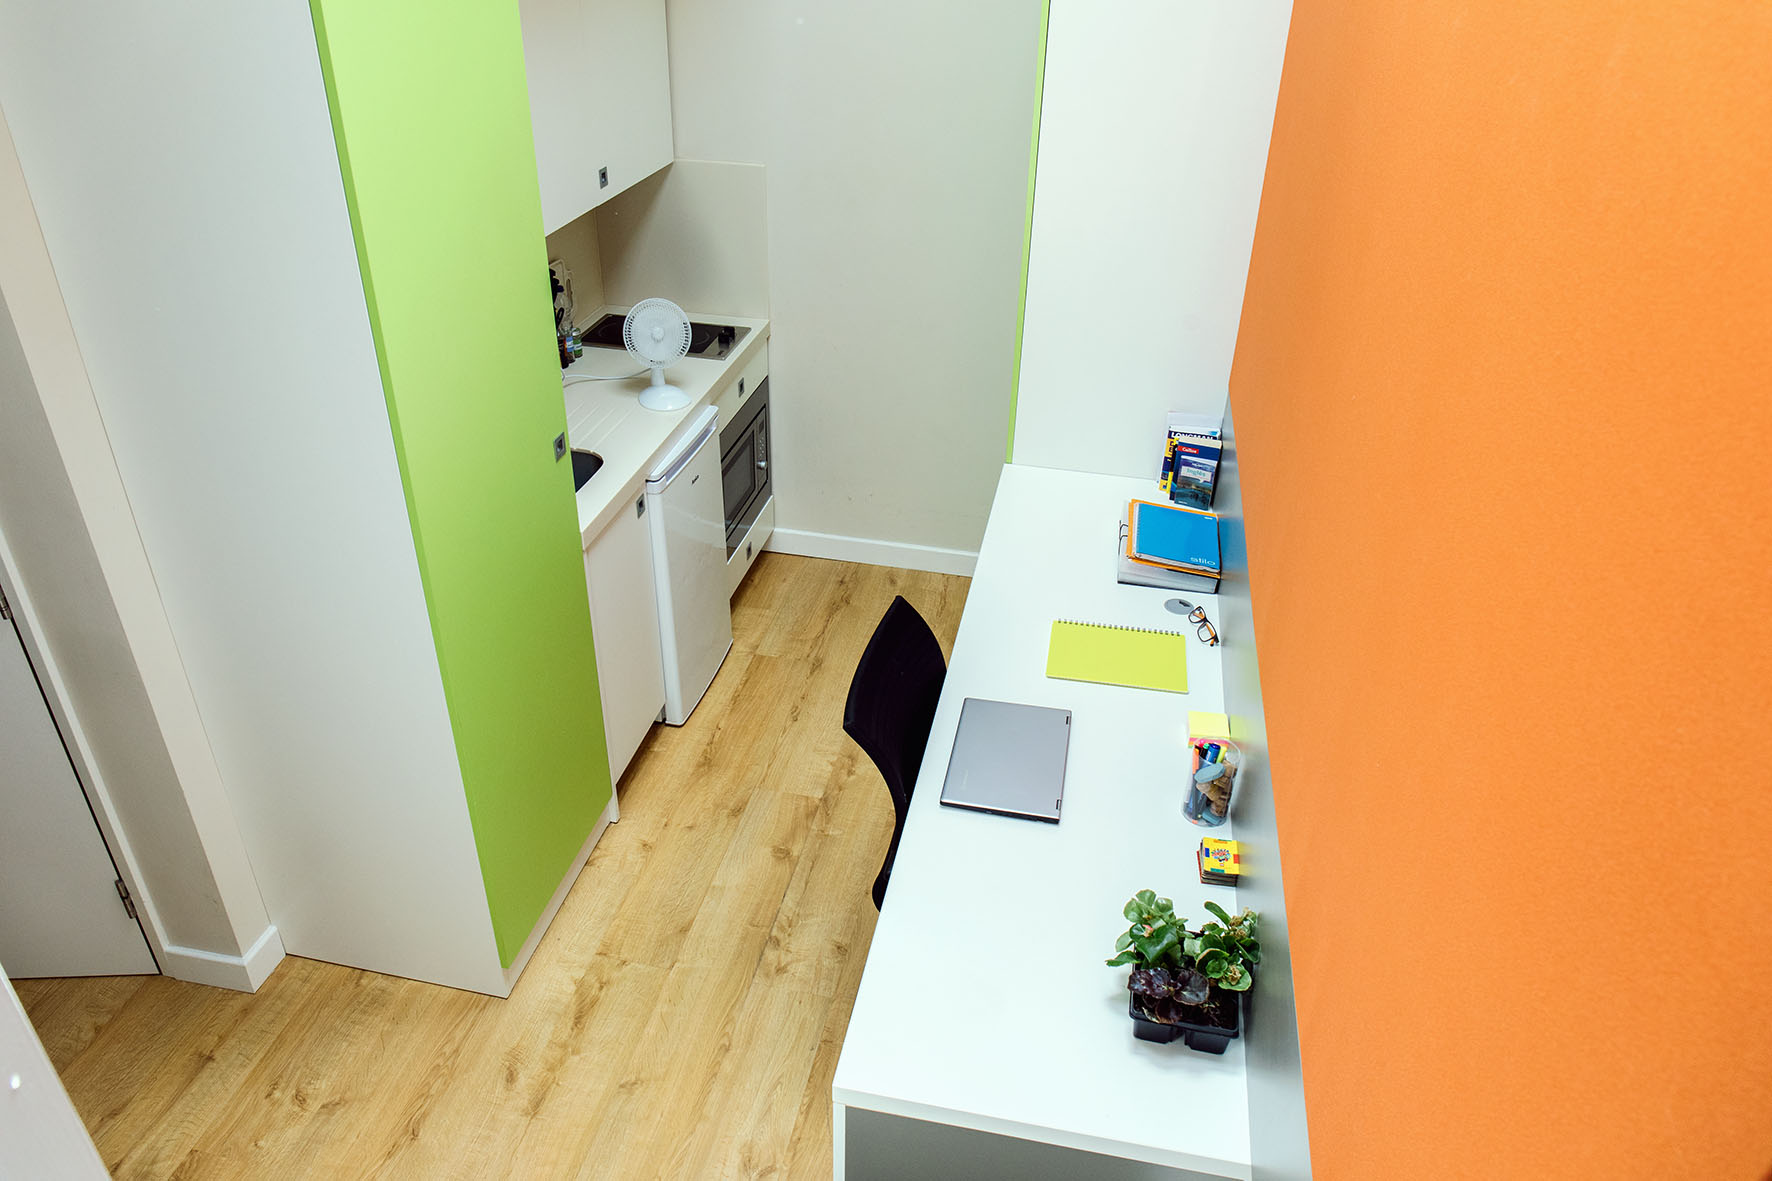 Kitchen and study space in a Premium Range 1 Bedroom flat at Cathedral Park in Bristol, Unite Students accommodation